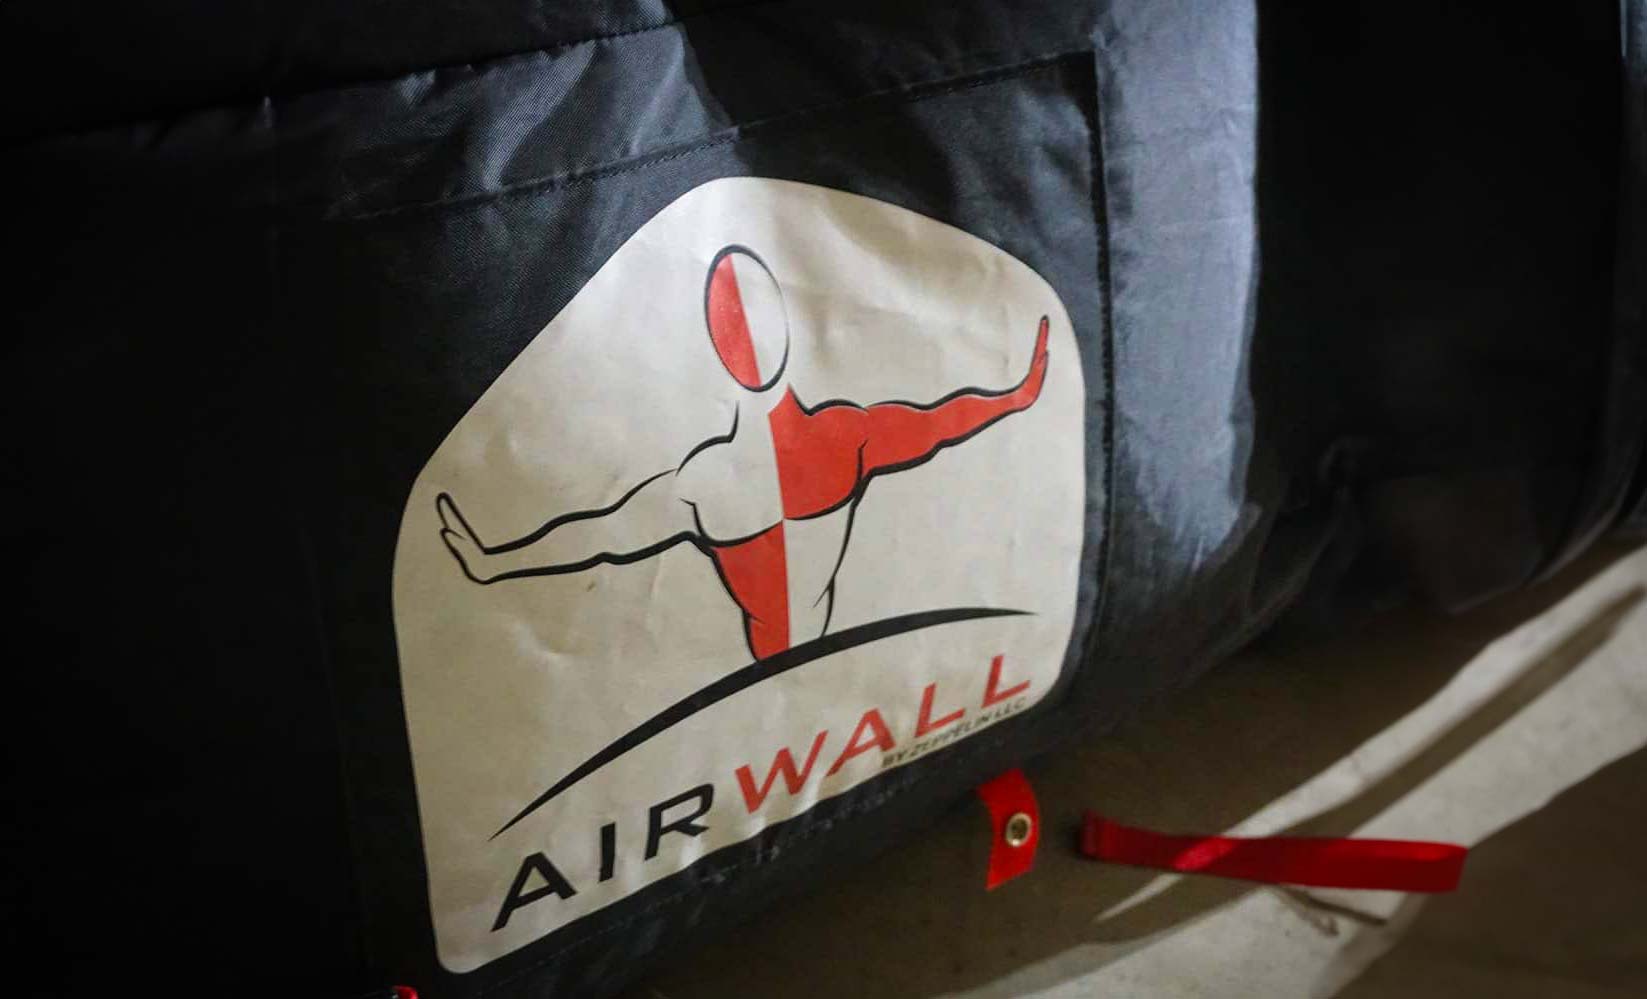 AirWall logo on Xpress product